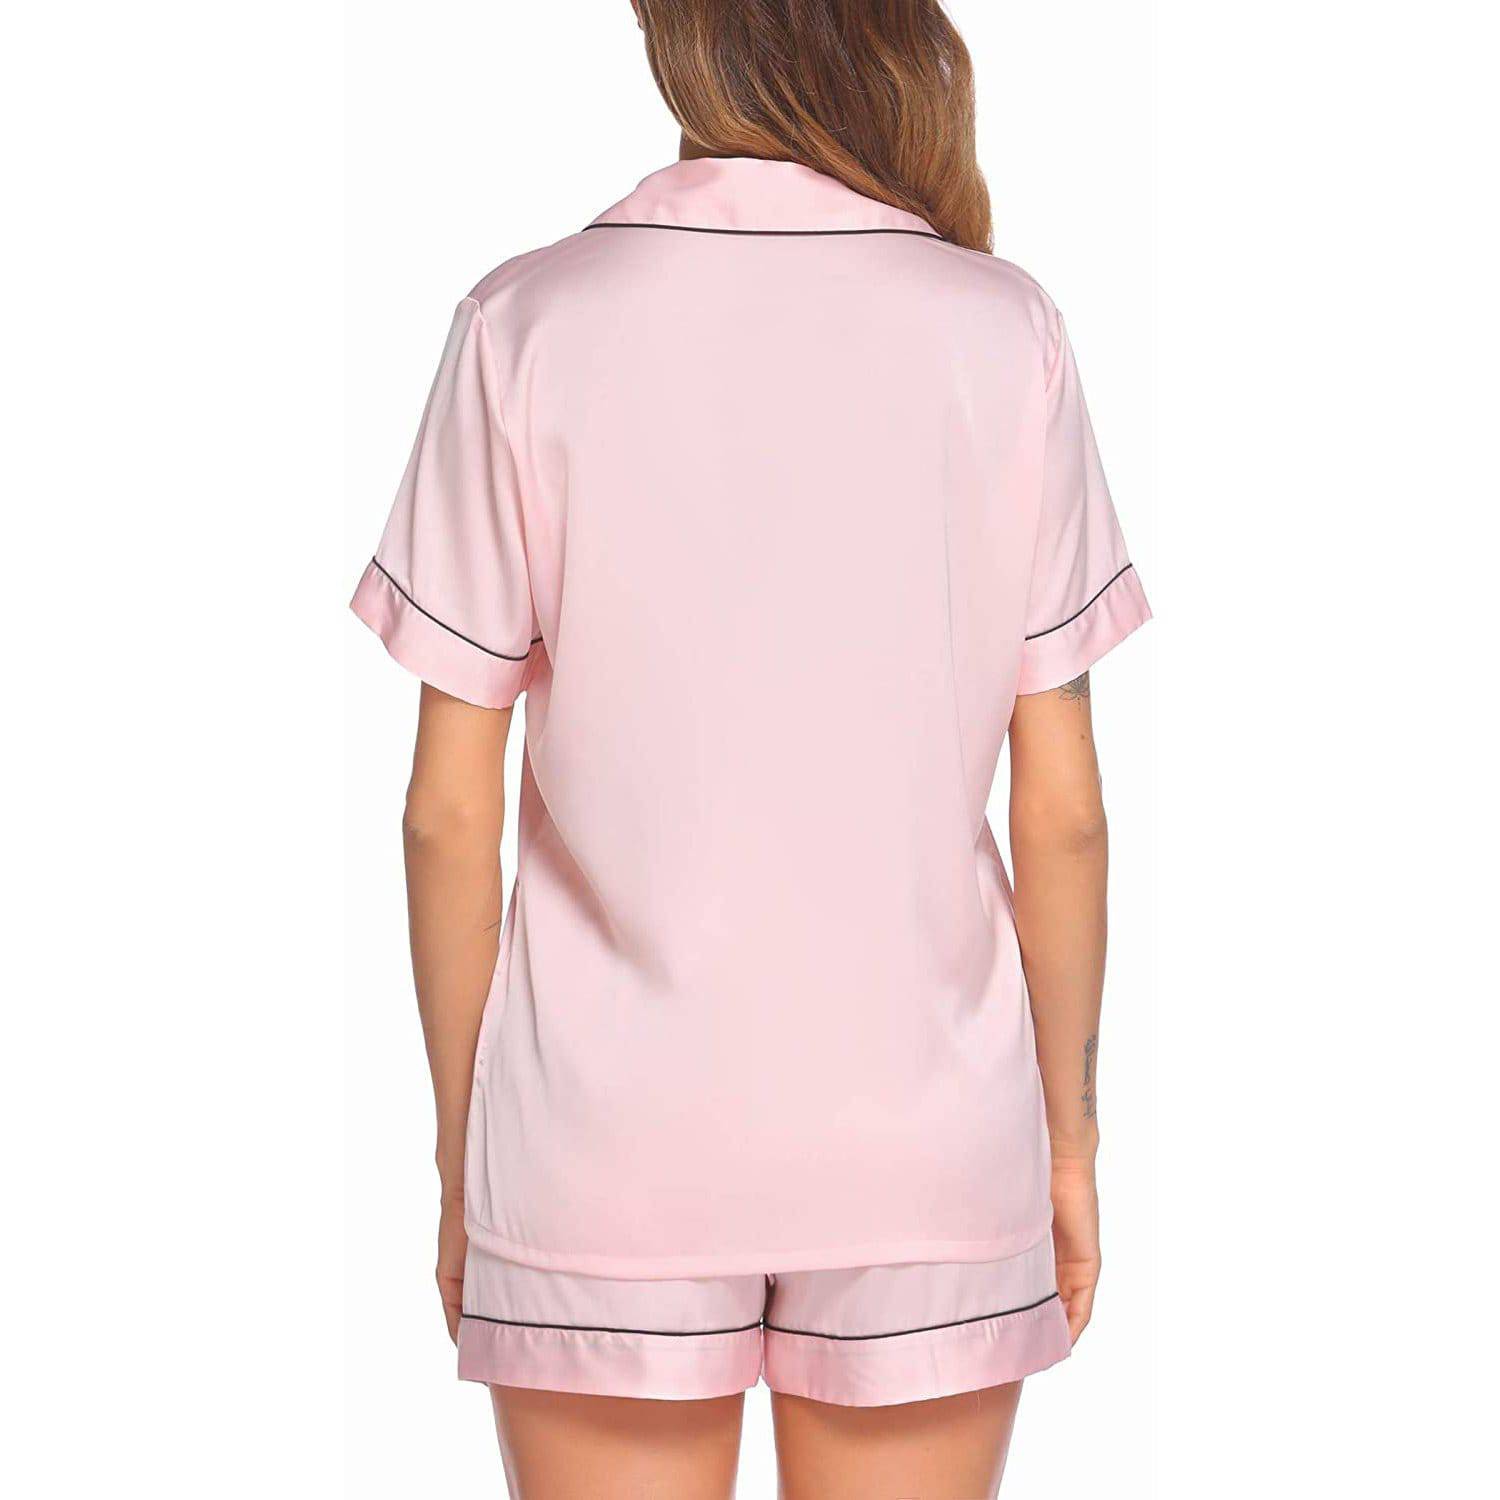 Silk Pajamas Short Set-Silk Pajamas Short Set ODM/OEM,Silk Pajamas Short  Set Manufacturers, Suppliers and Exporters - at Anhui Comfytouch Ltd.